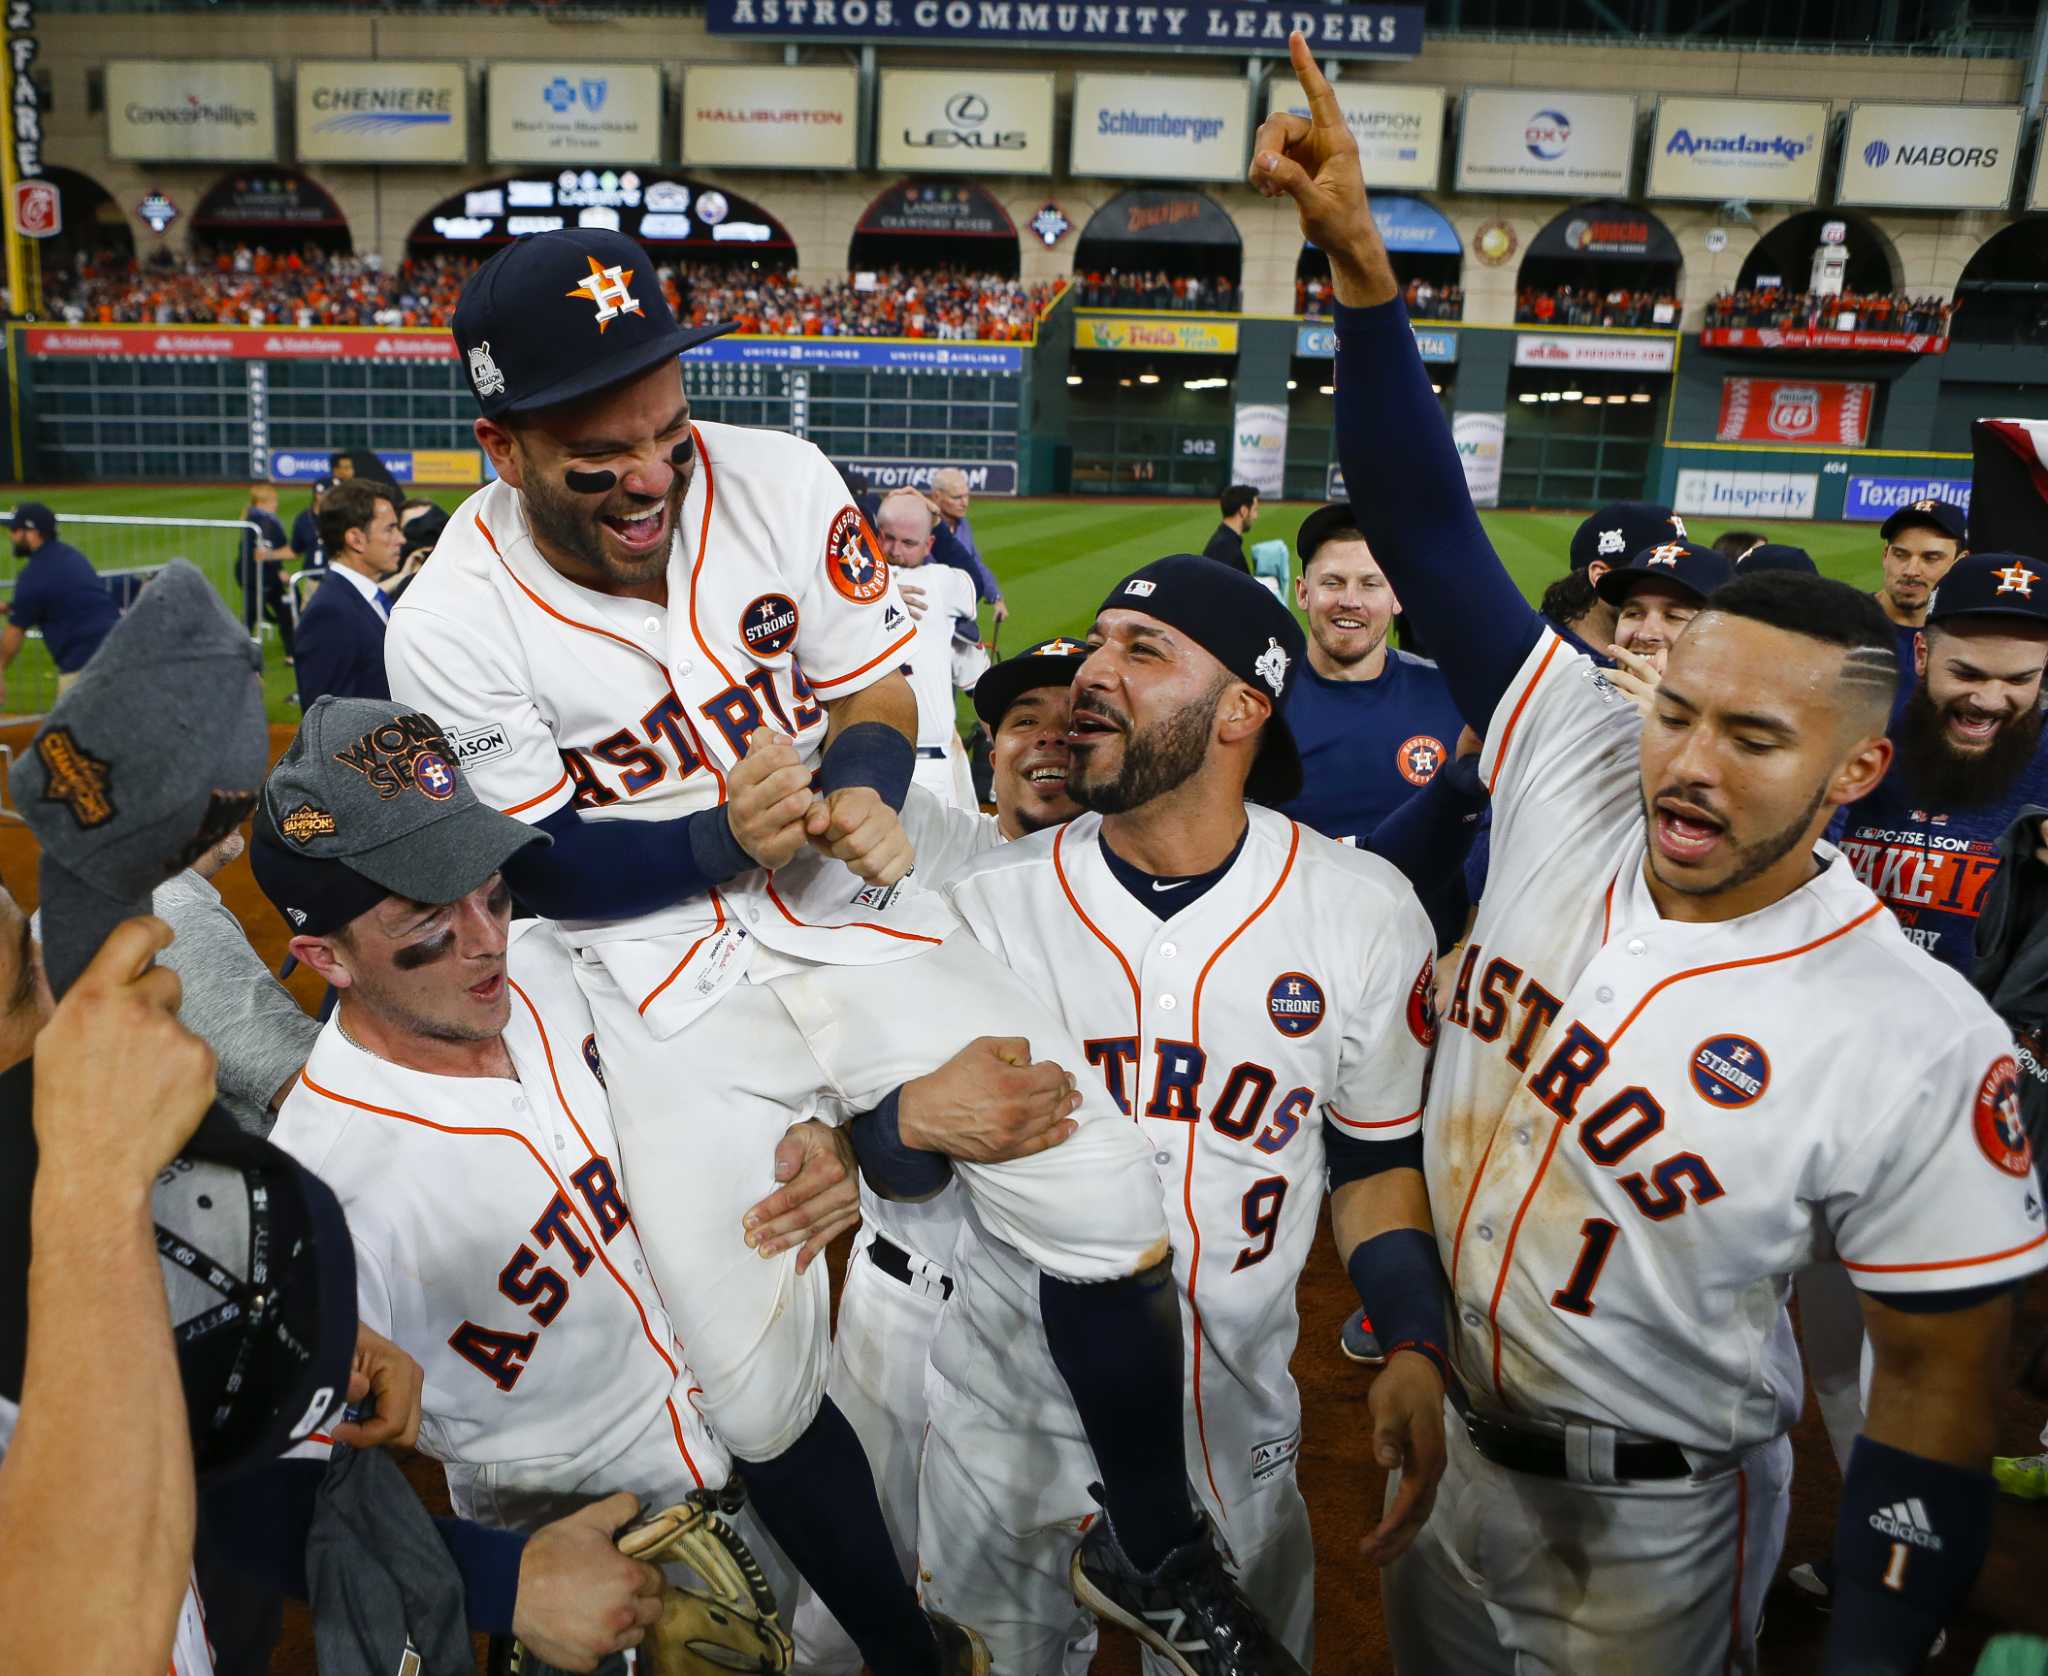 Inside the Astros' champagne celebration in the Minute Maid locker room